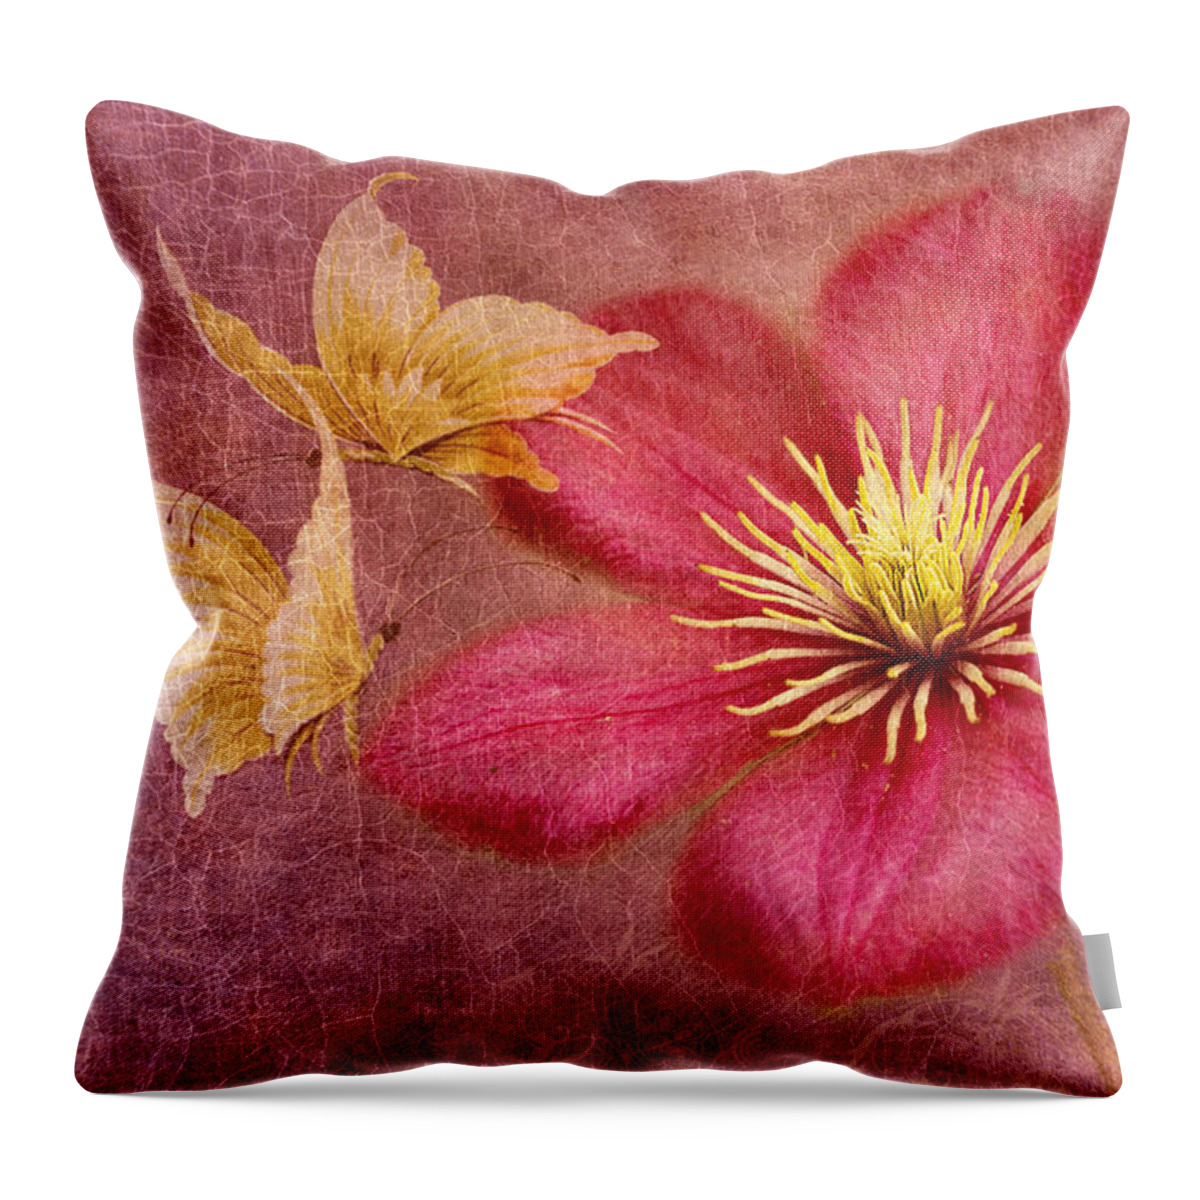 Pink Clematis Flower Throw Pillow featuring the photograph In Dance by Marina Kojukhova